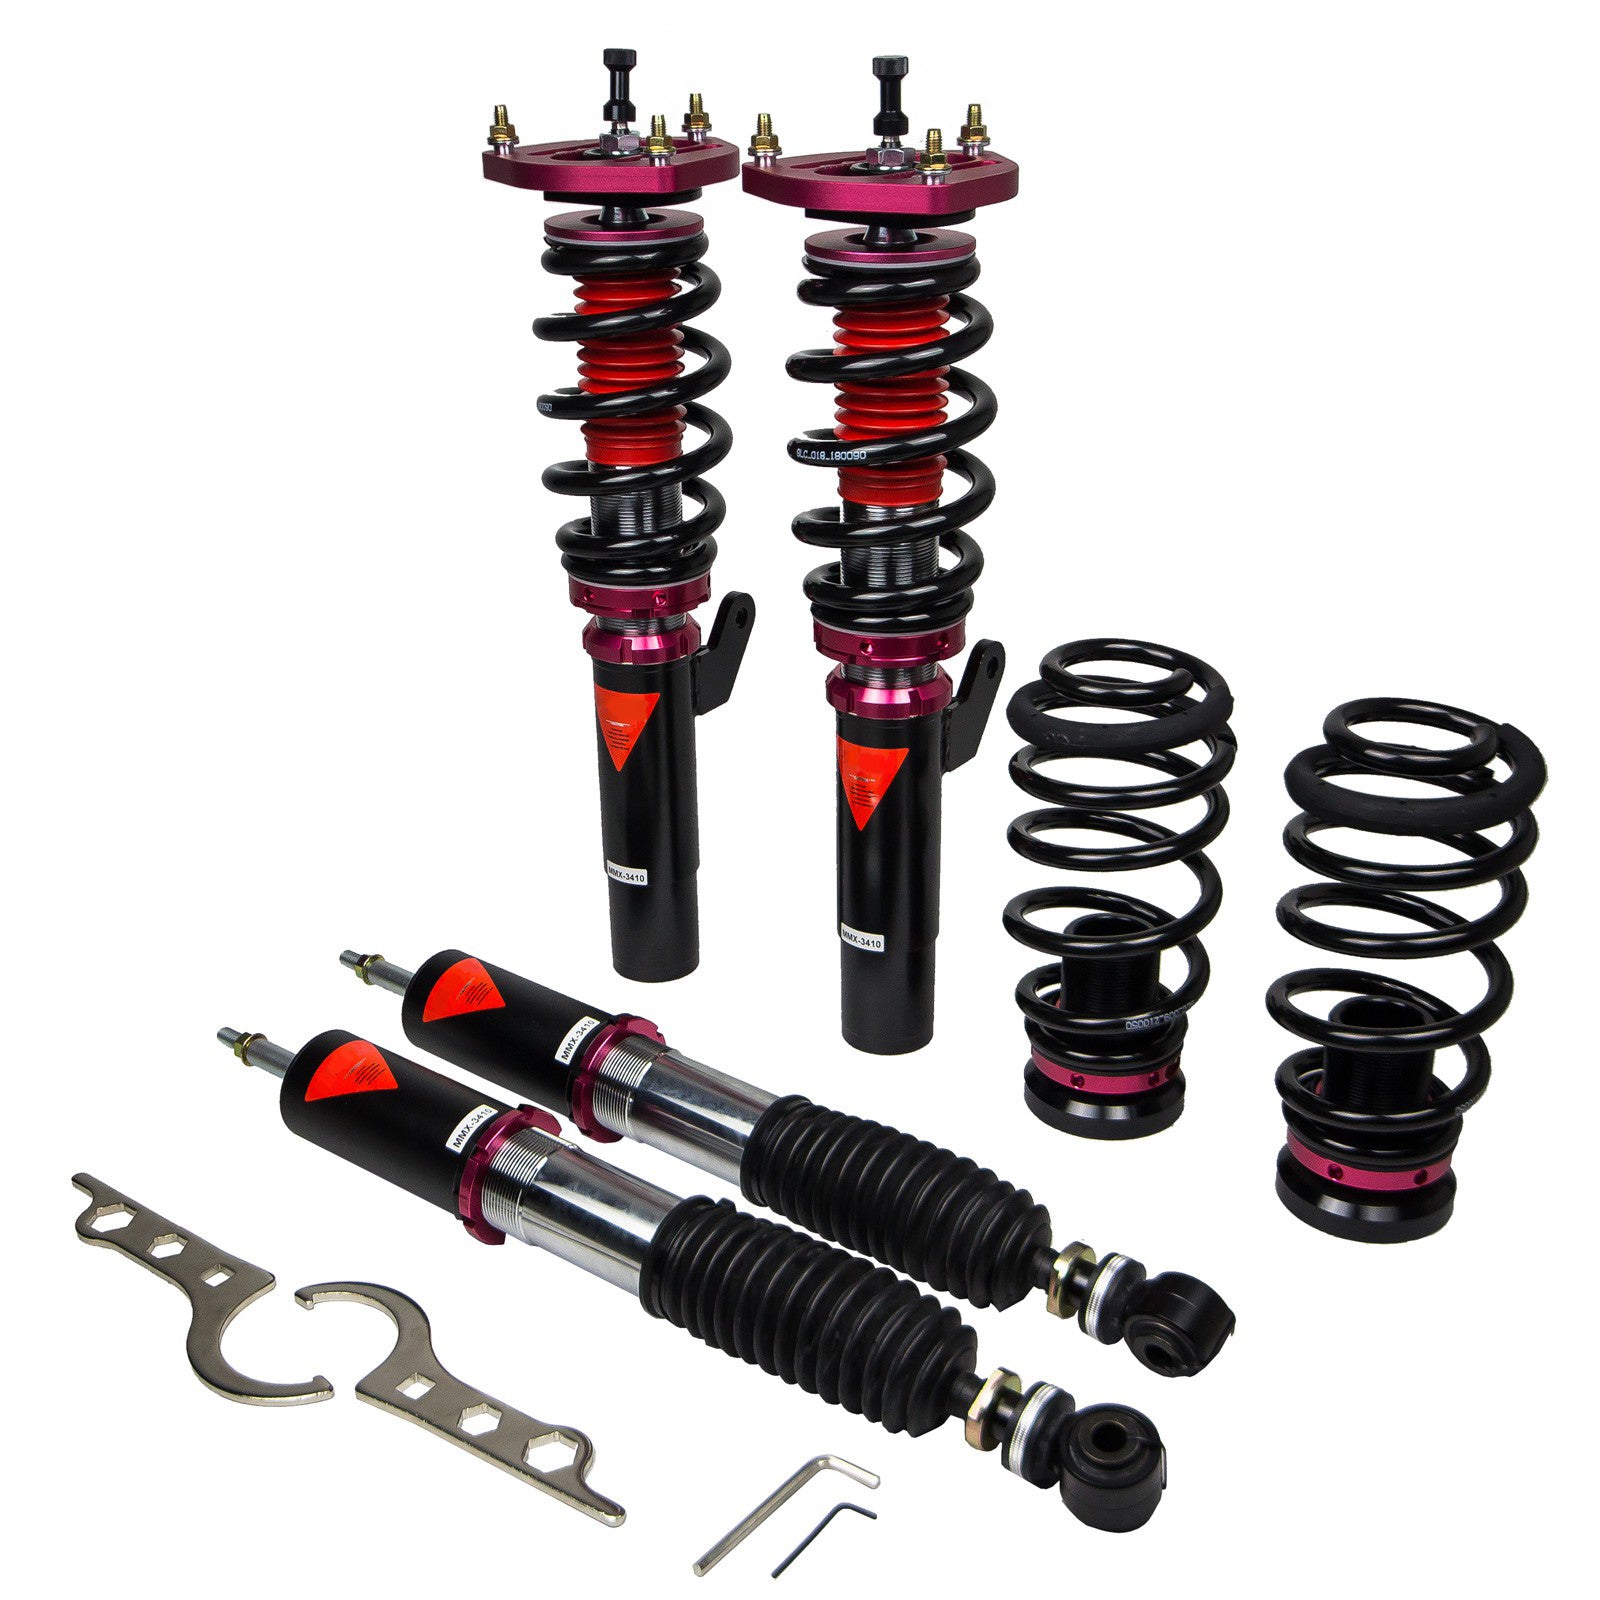 MMX3420 MAXX Coilovers Lowering Kit, Fully Adjustable, Ride Height, 40 Clicks Rebound Settings, Volkswagen Golf(MK6) 10-14(2WD)